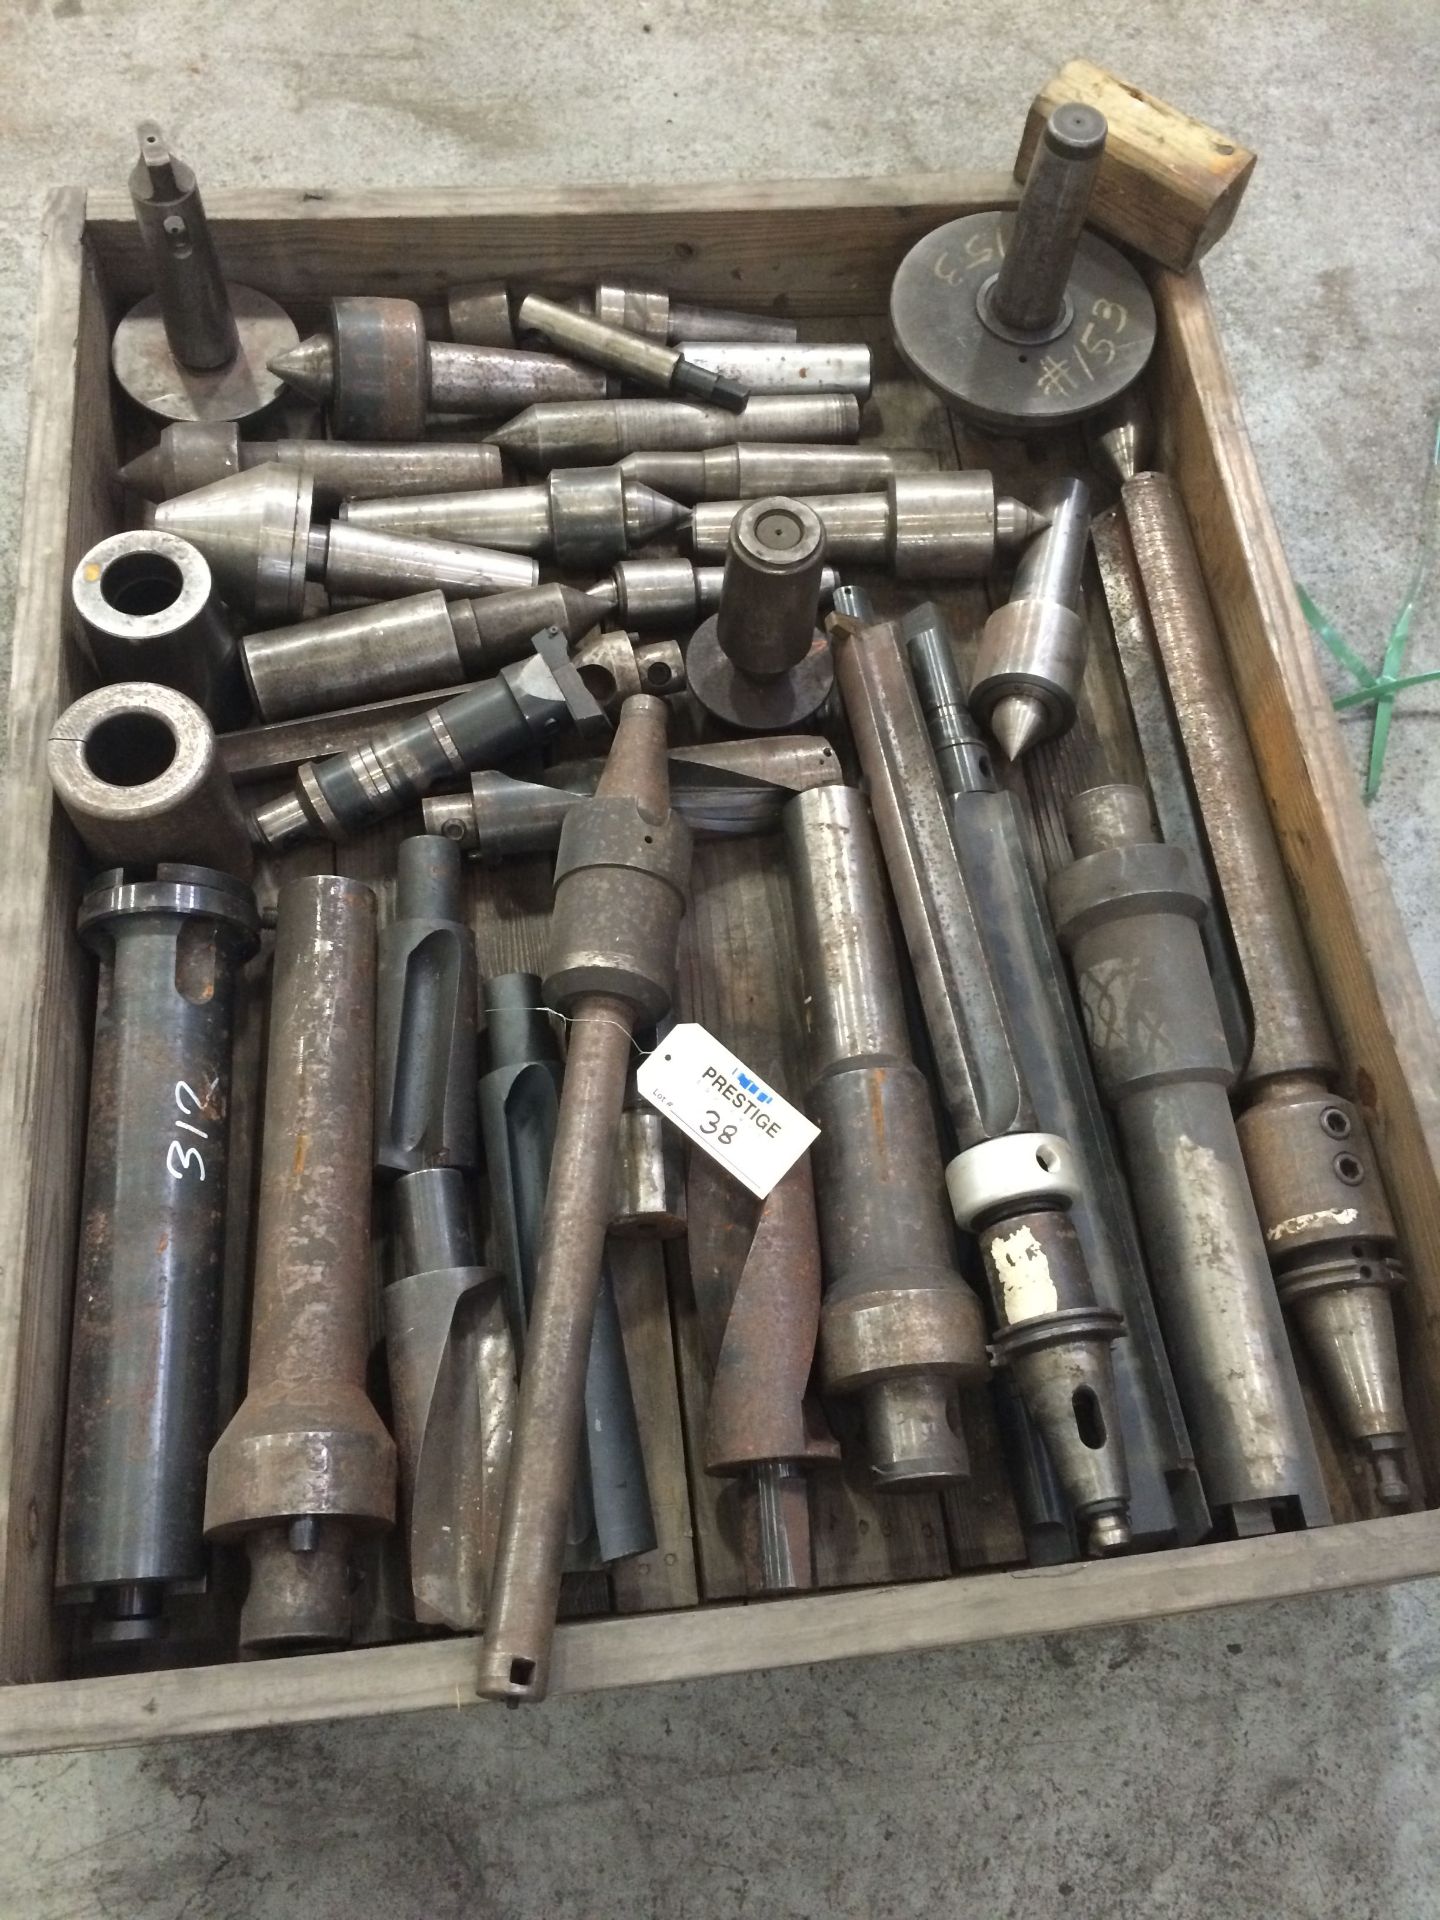 SKID OF #50 TAPER BORING TOOLS AND MISC. MORSE TAILSTOCKS